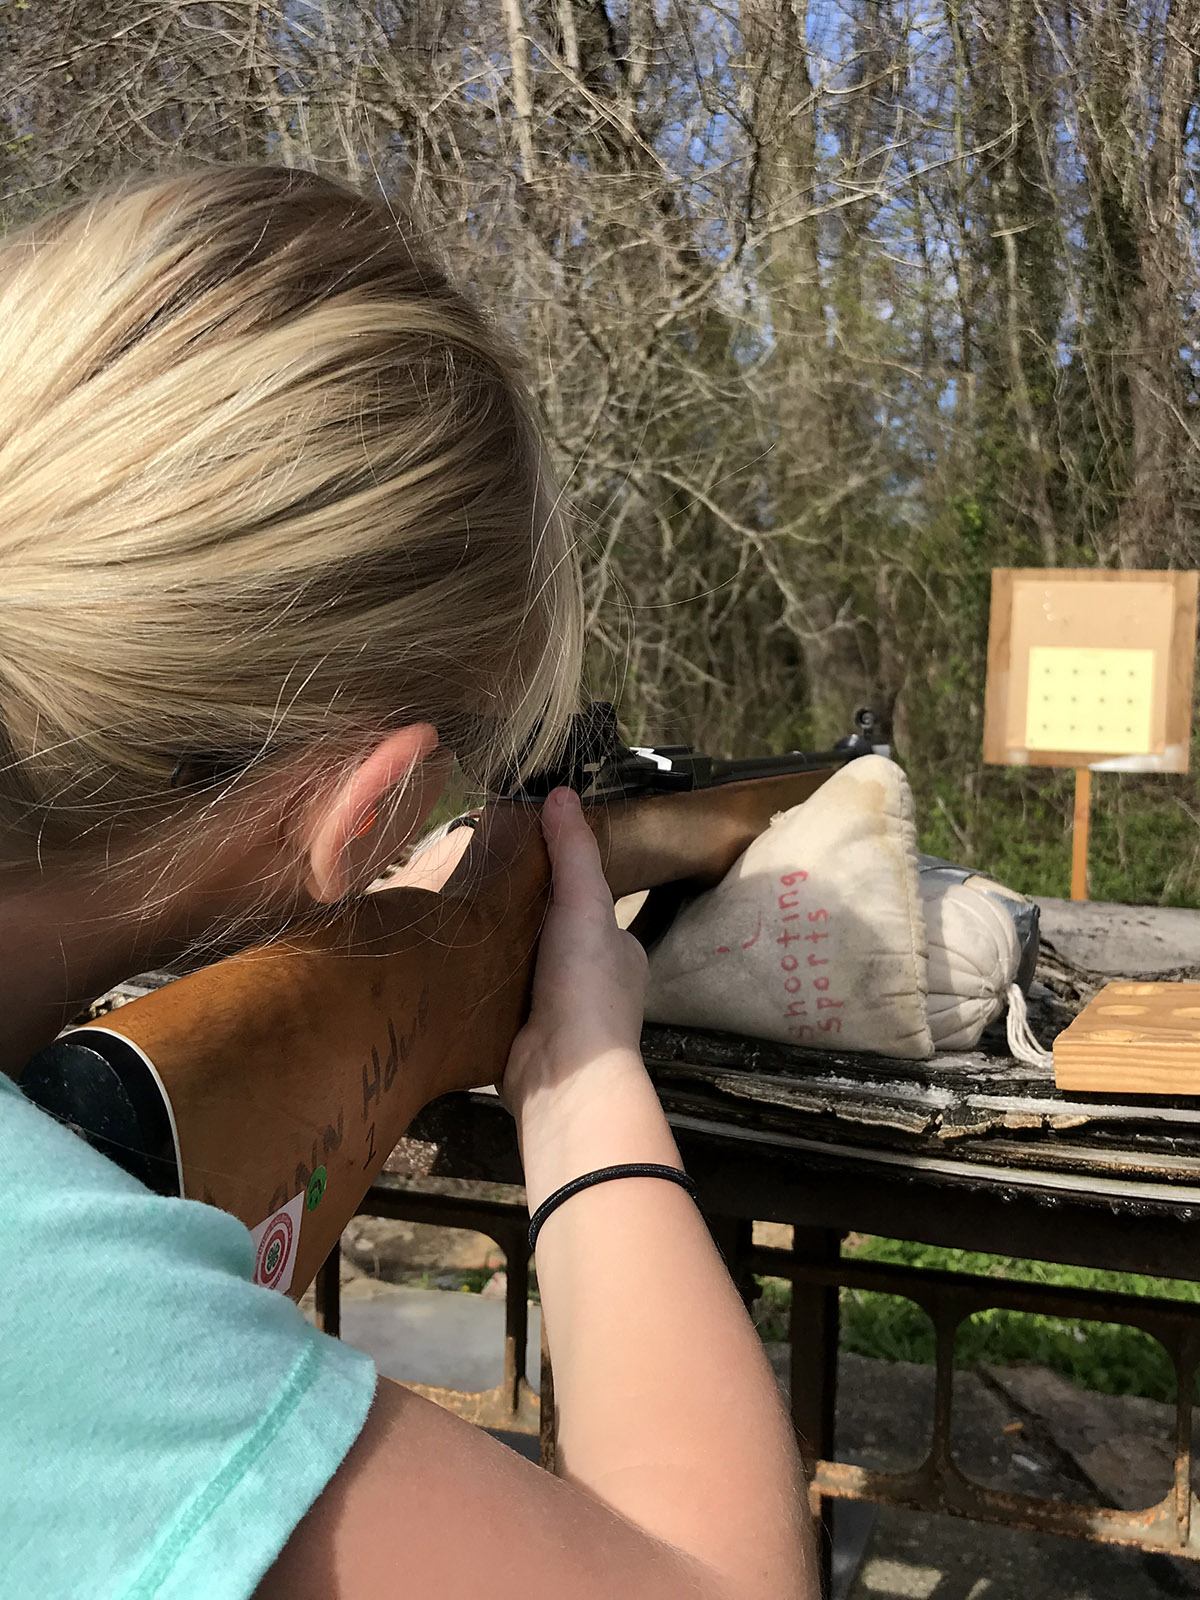 A Shooting Sports participant aims her rifle at a target.